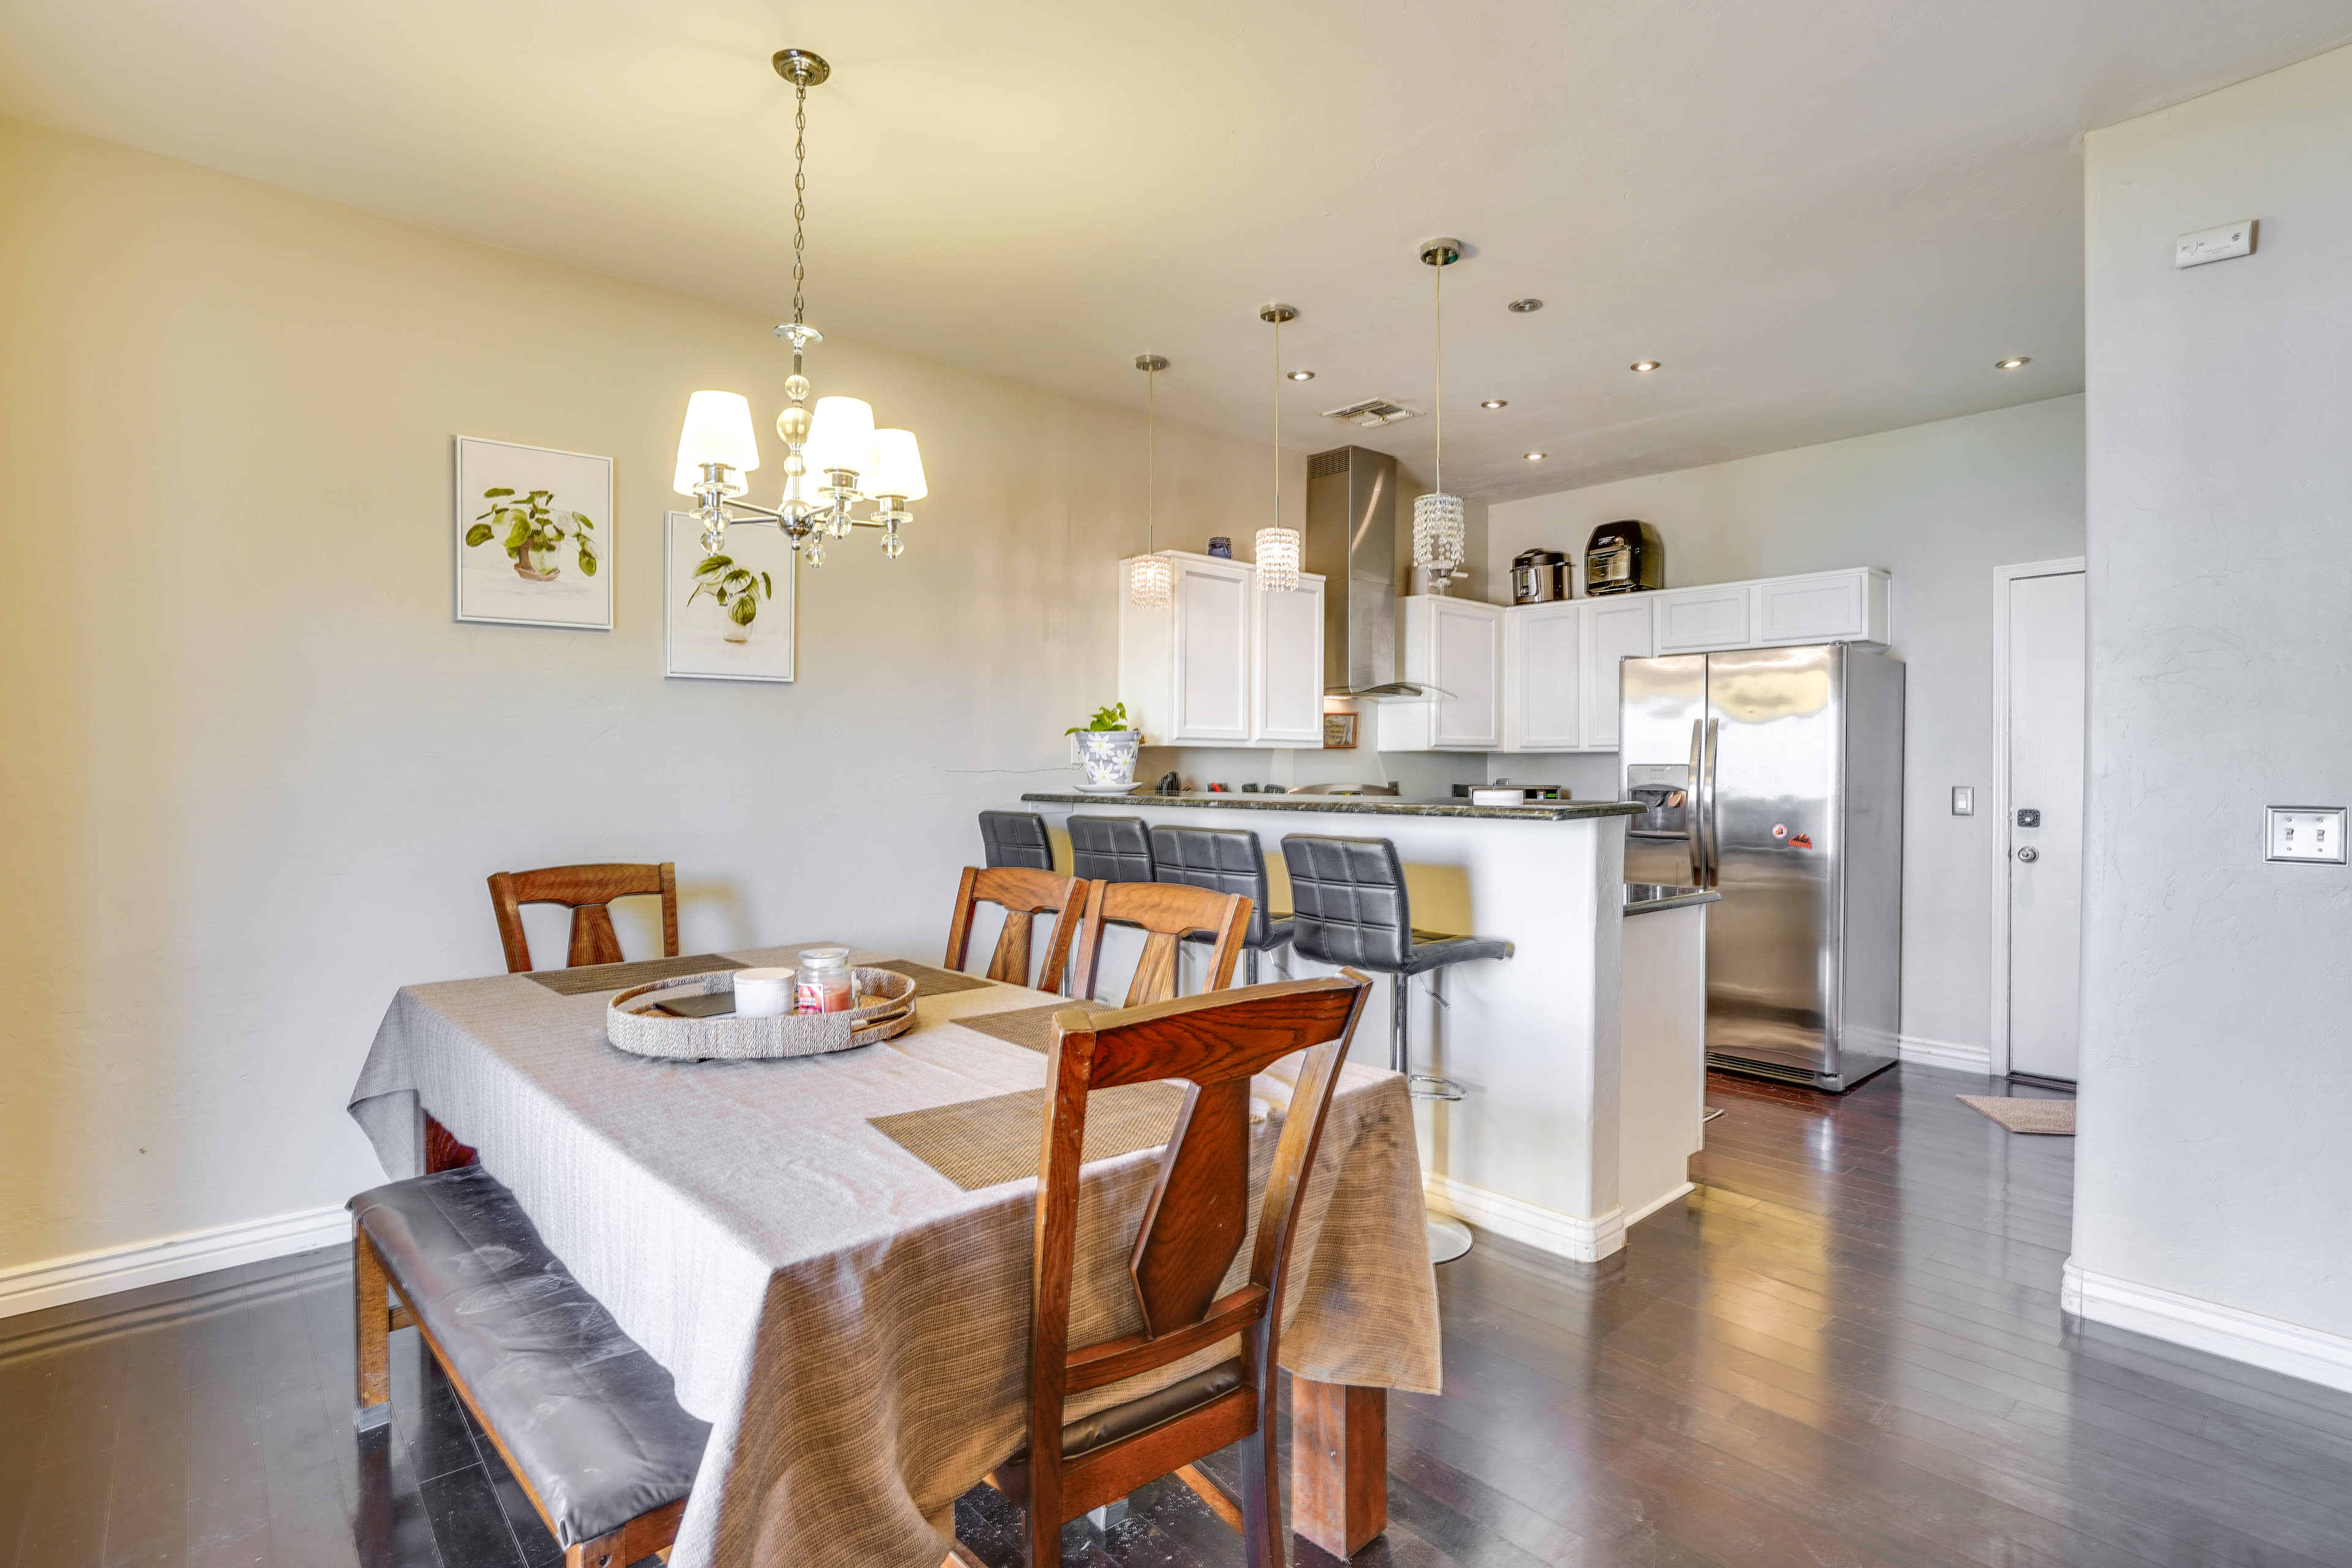 Dining Room | 1st Floor | Fully Equipped Kitchen